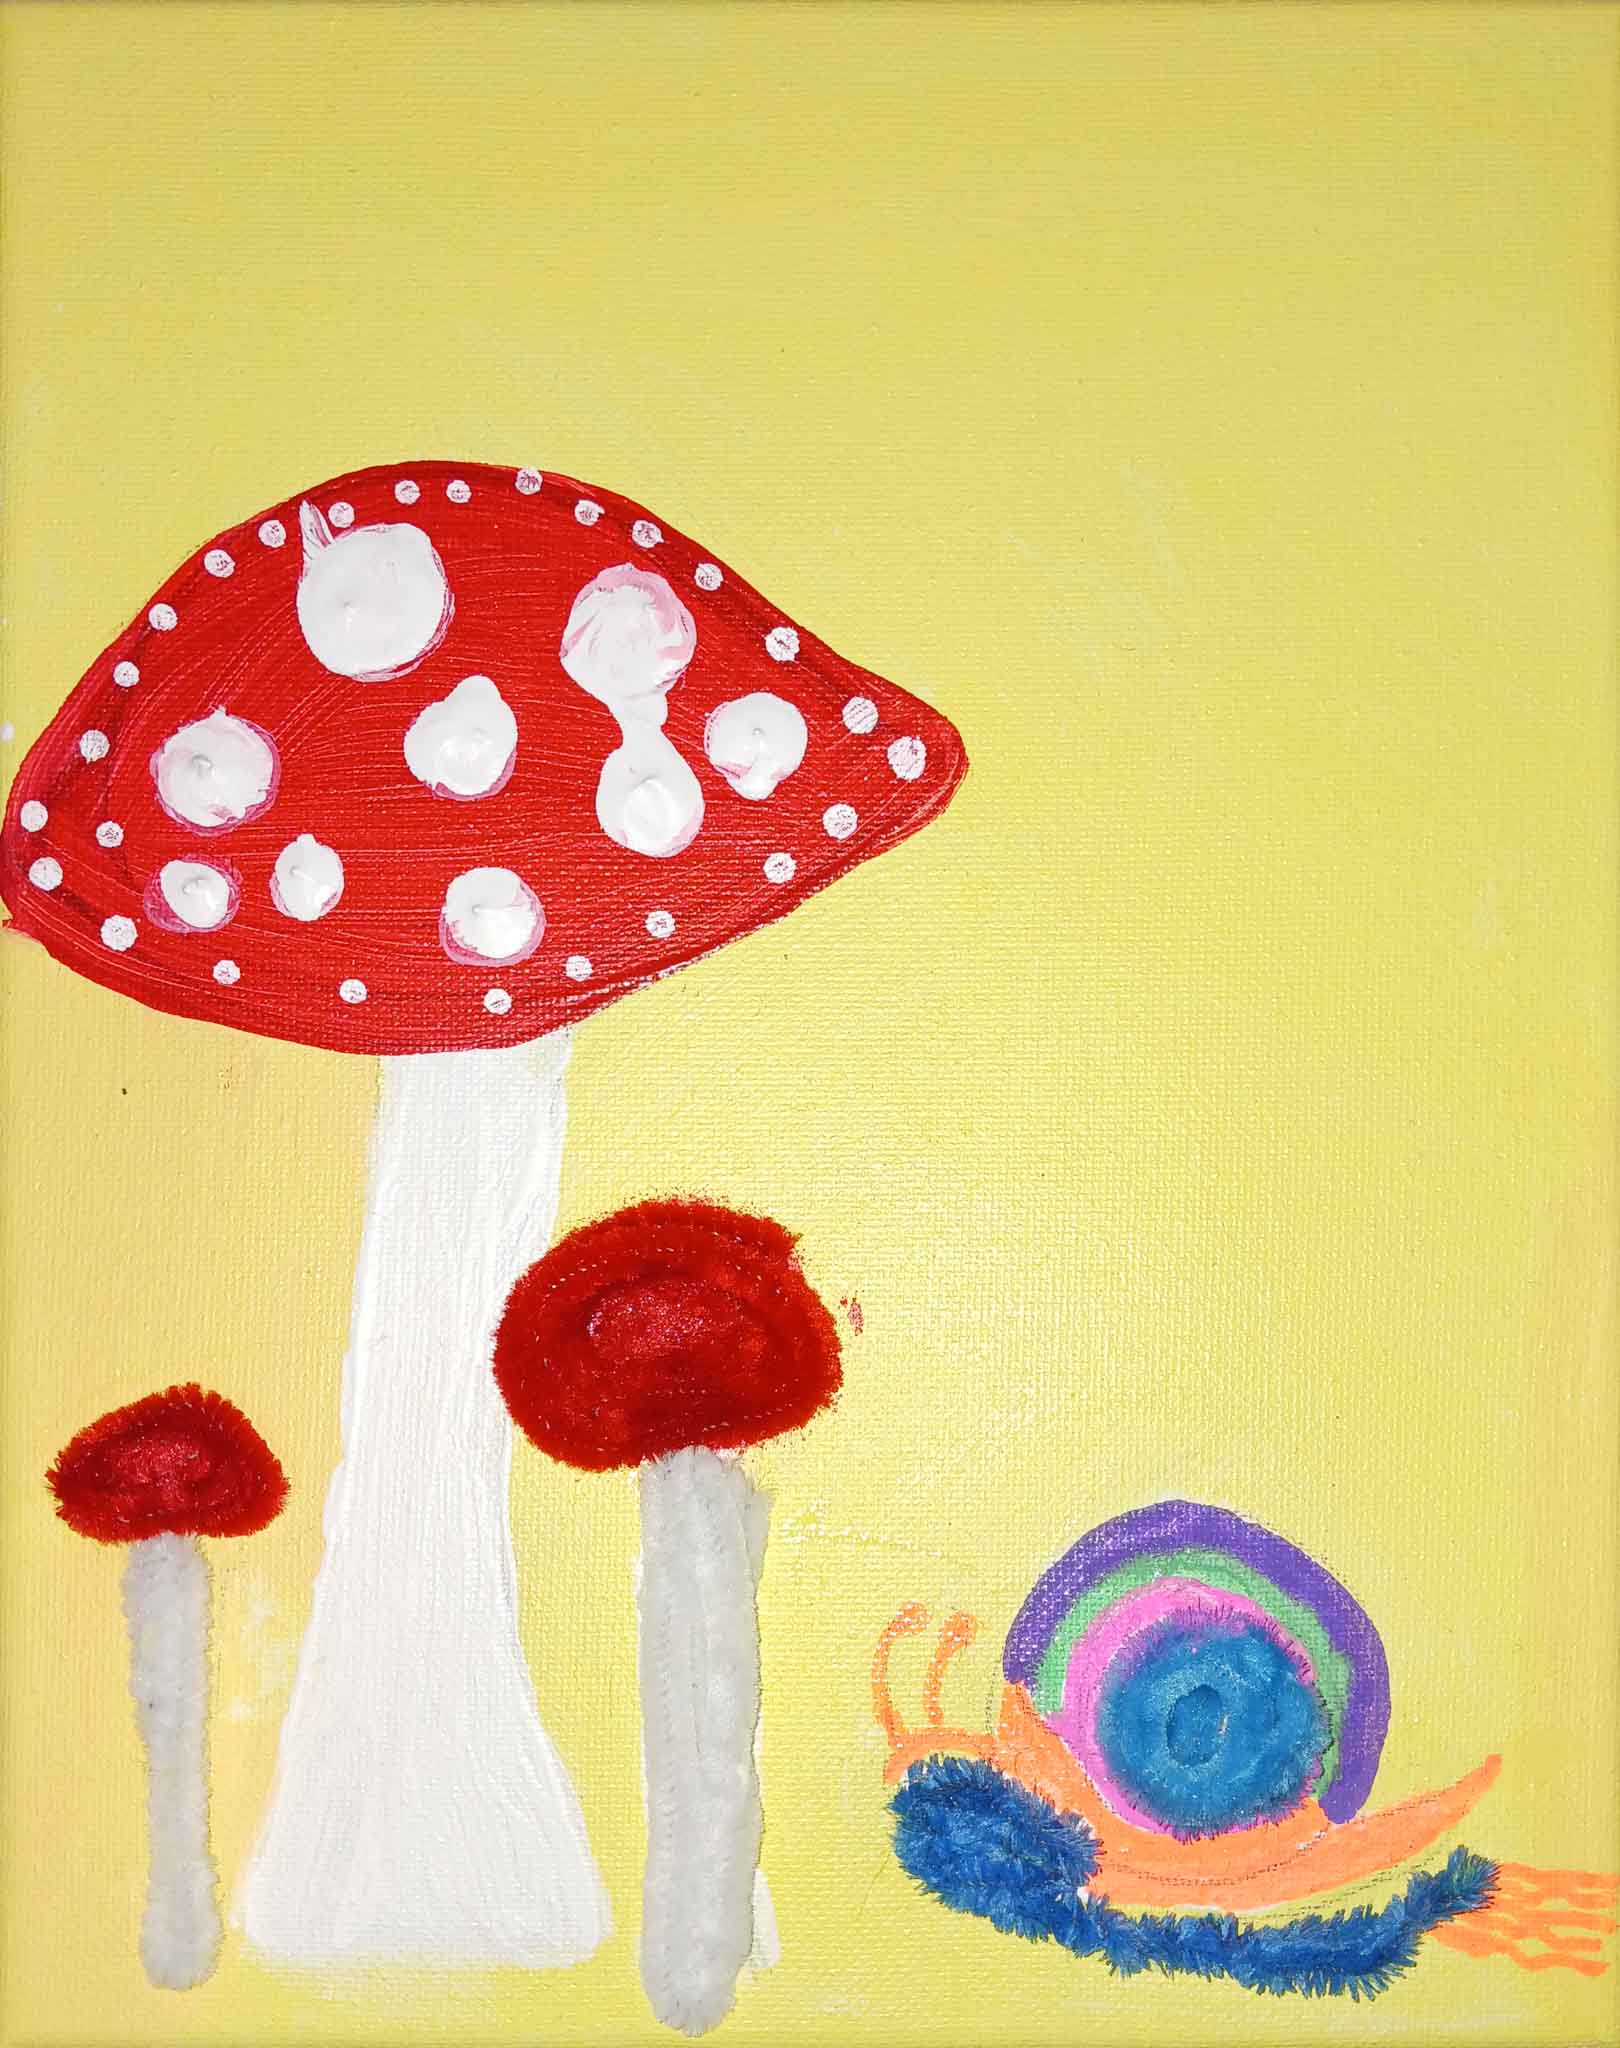 The mushroom and the snail